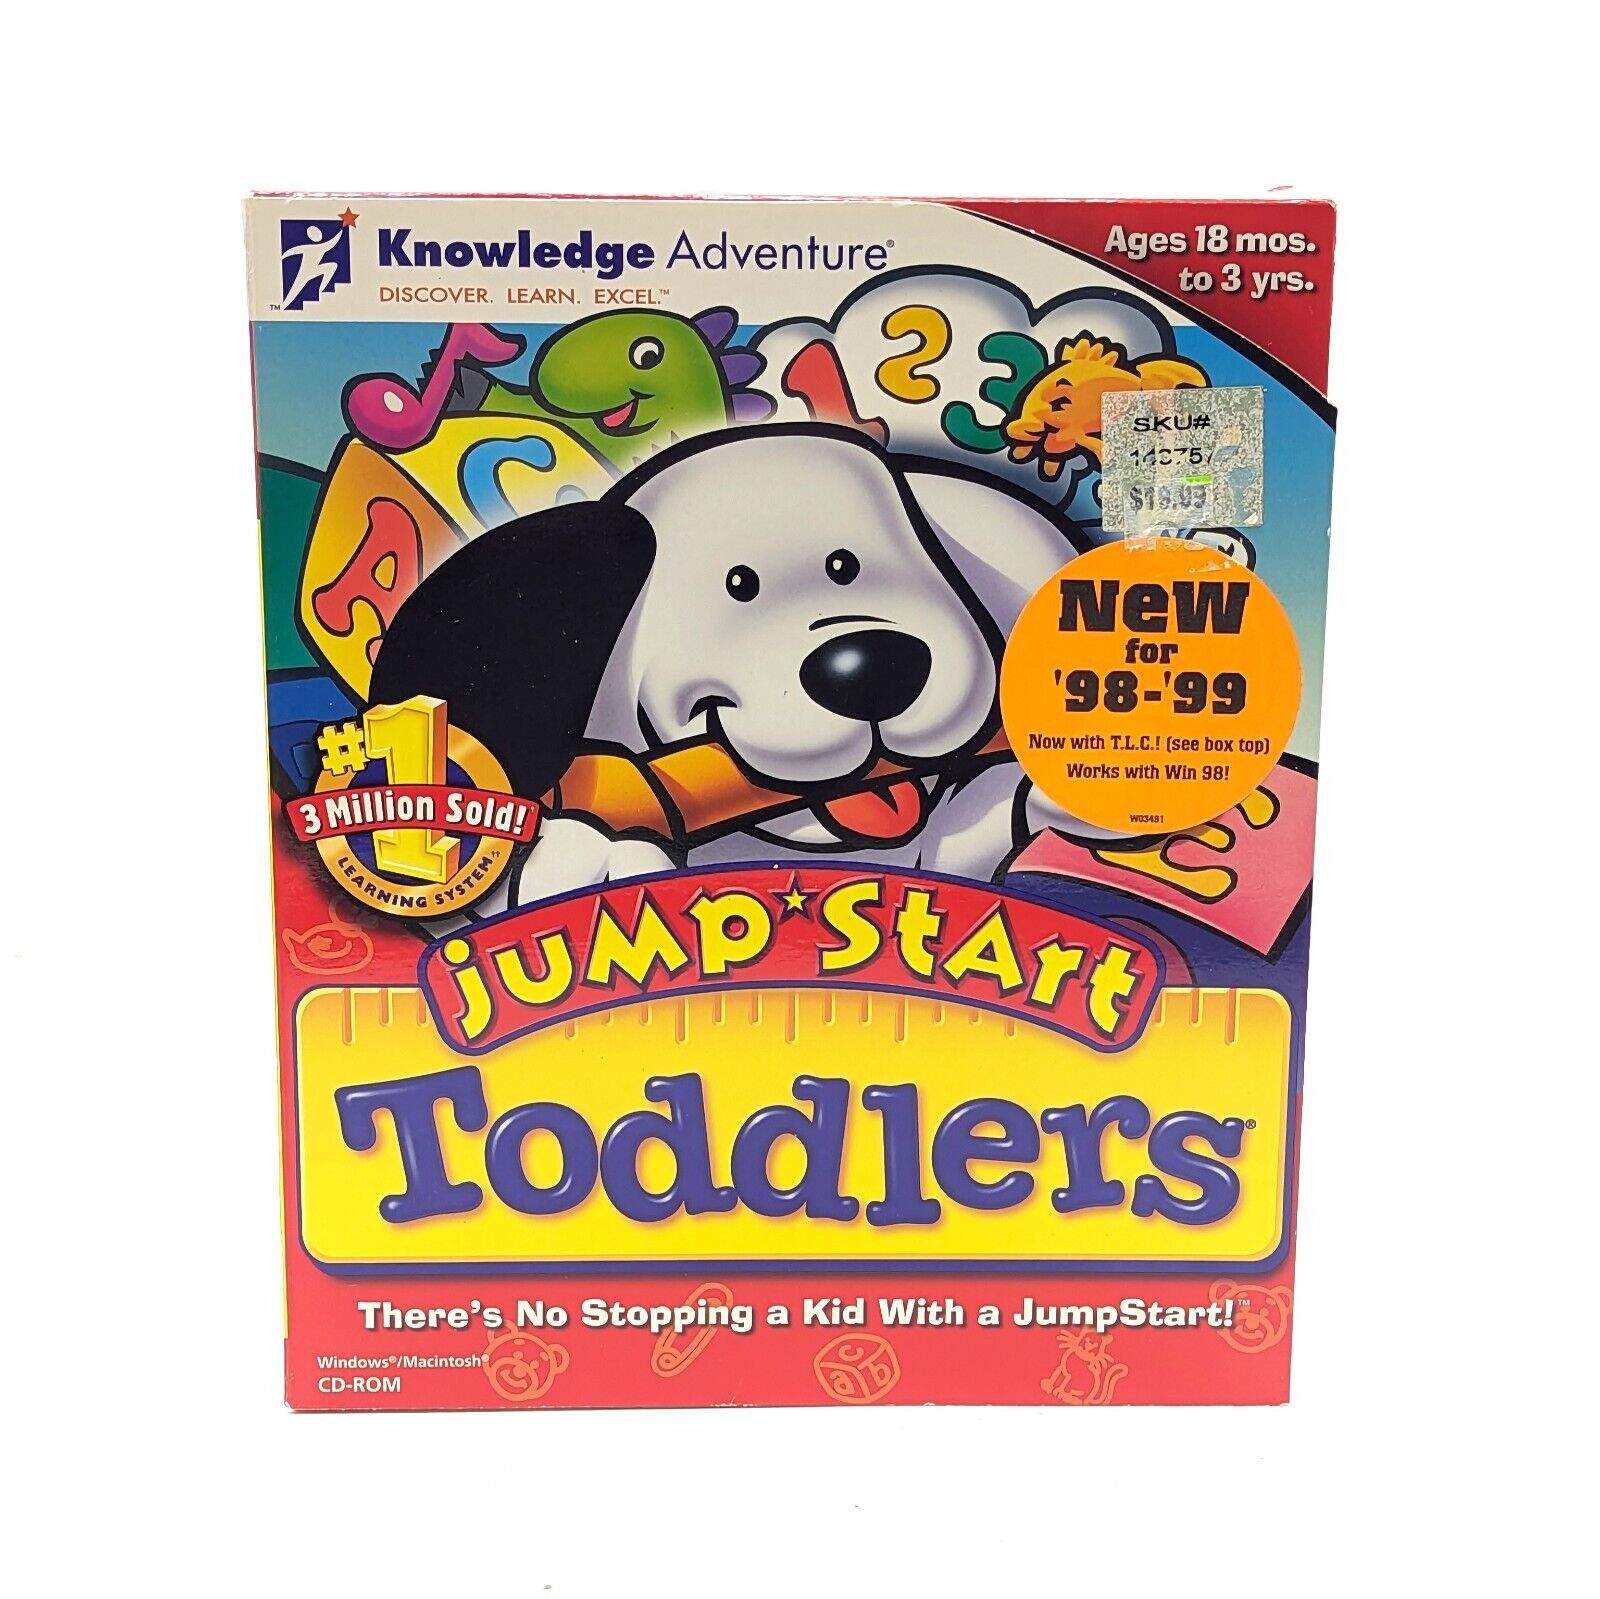 New 1996 Knowledge Adventure Jumpstart Toddlers PC Big Box Ages 18 mo to 3 years